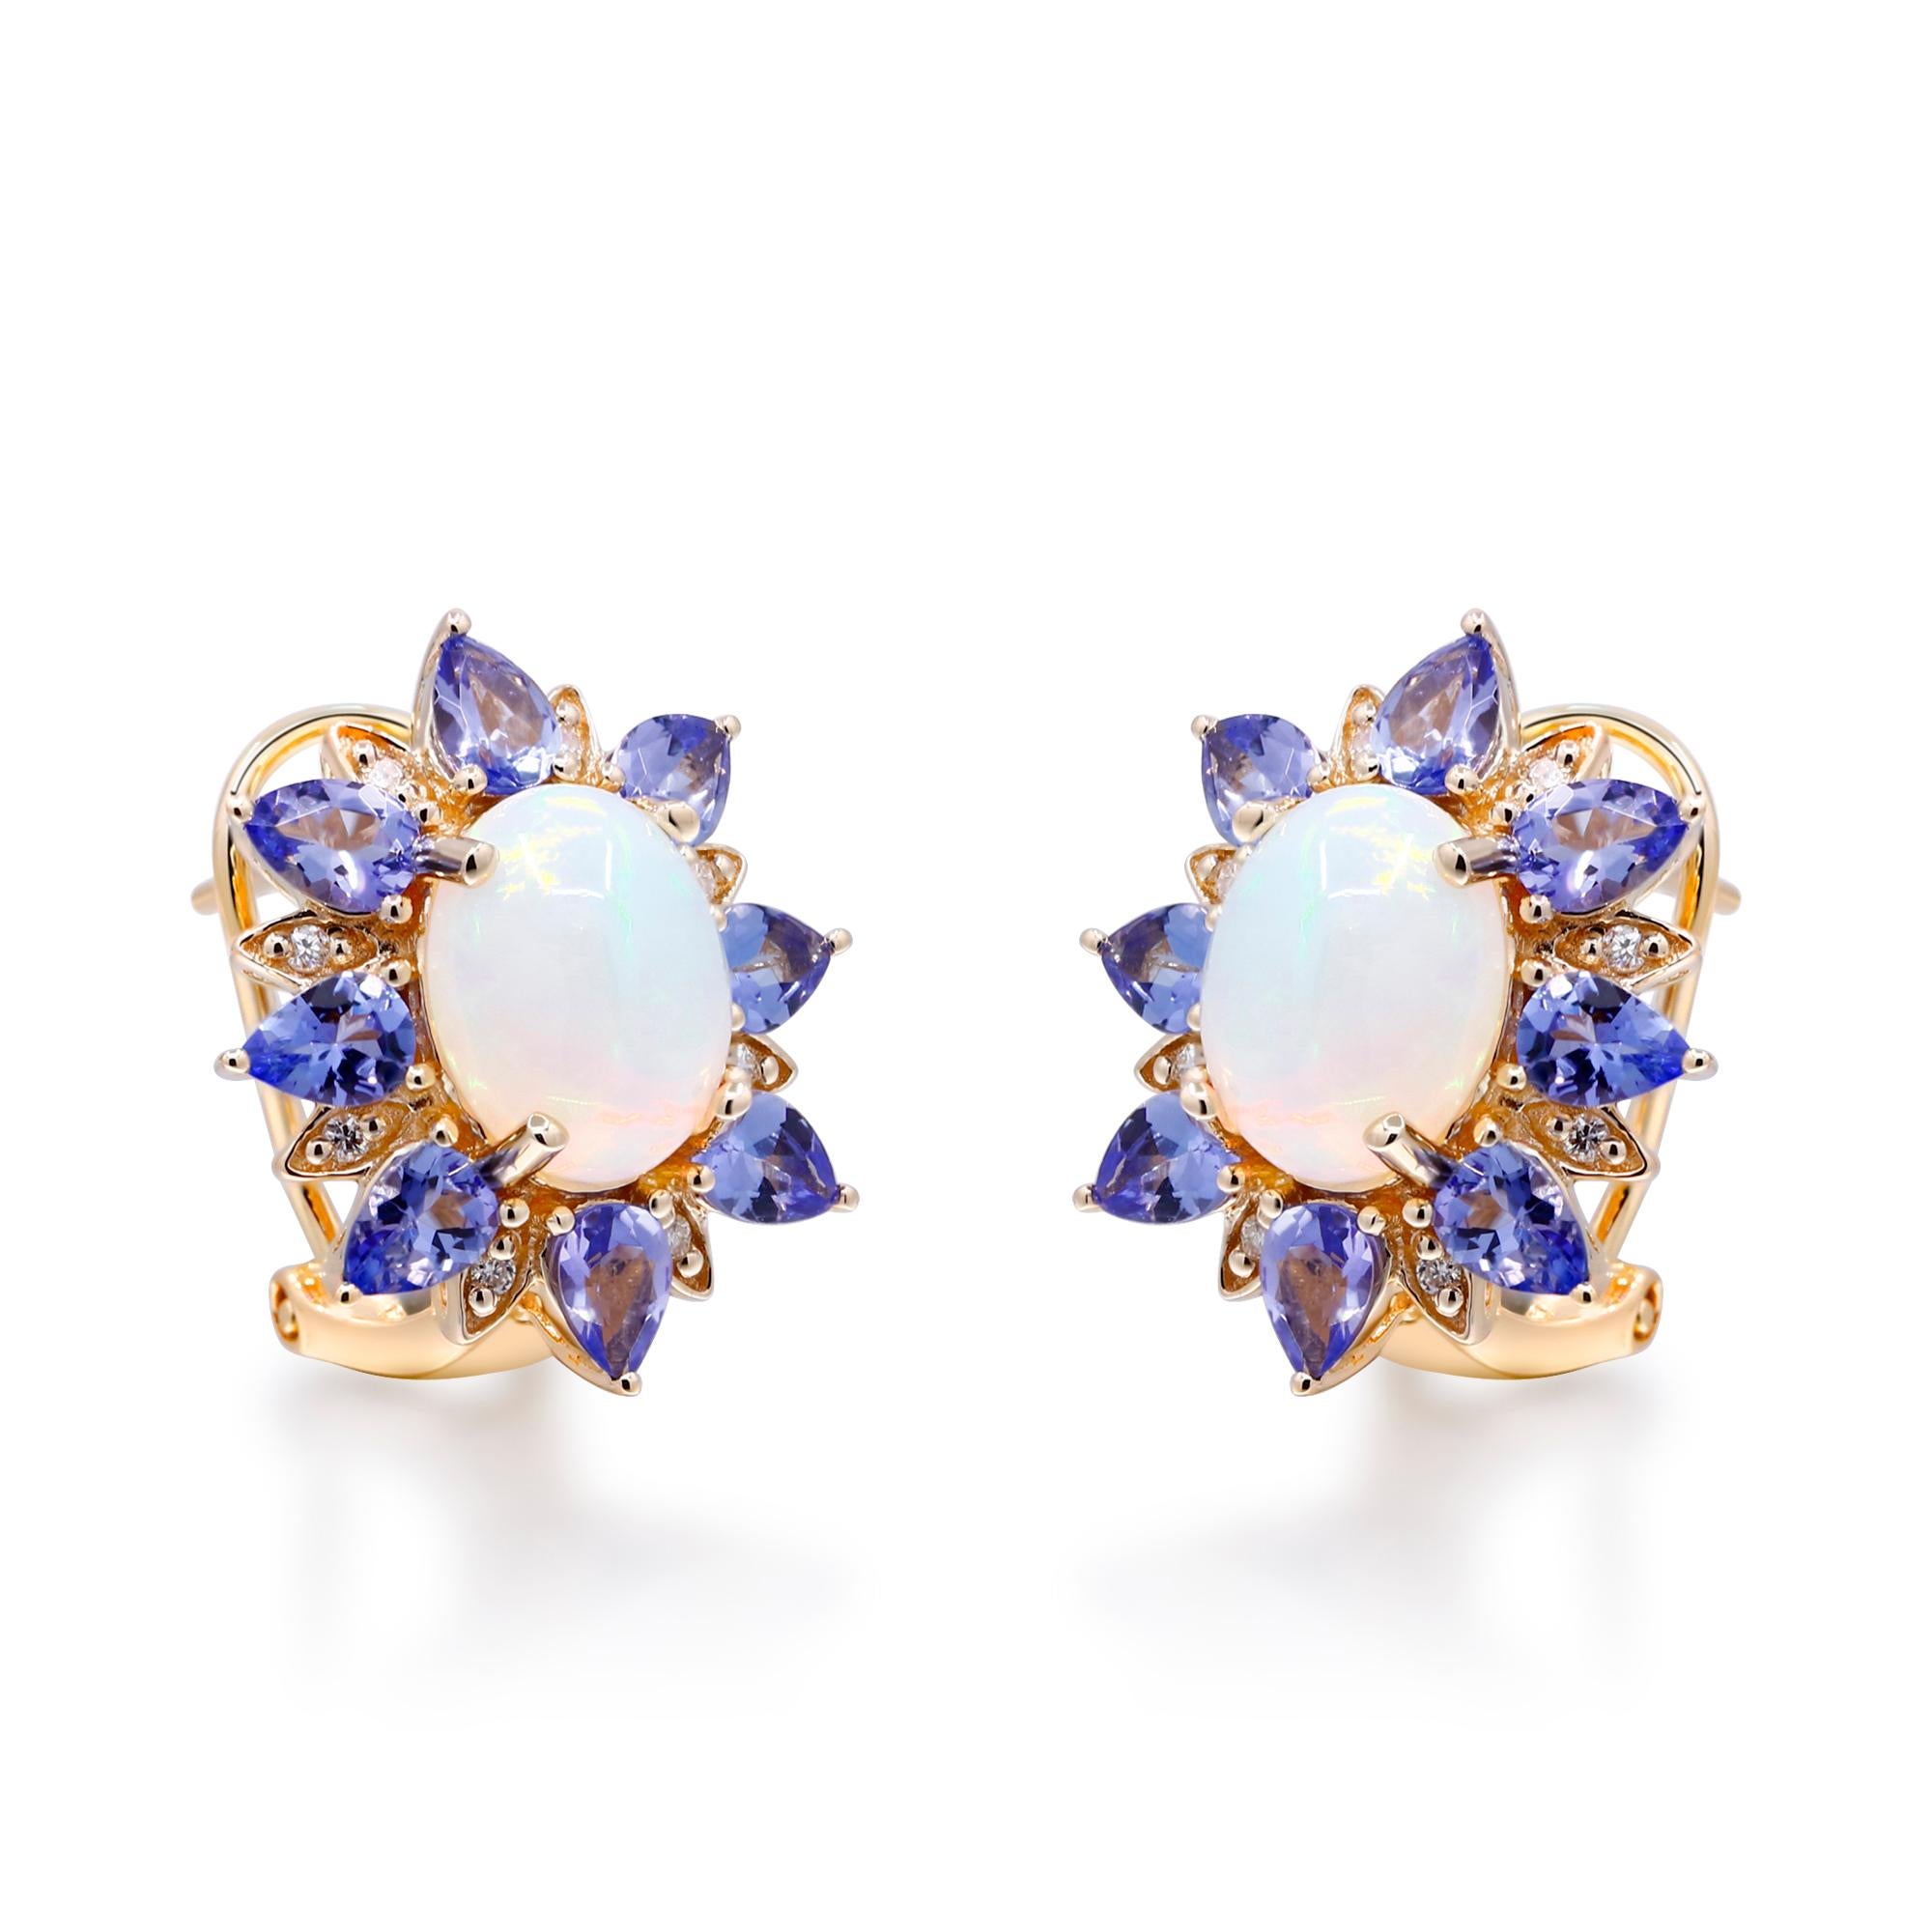 Decorate yourself in elegance with this Earring is crafted from 10-karat Yellow Gold by Gin & Grace Earring. This Earring is made up of 9x7 mm Oval - Cab (2pcs) 2.55 carat Ethiopian Opal, 3x4 mm Pear-cut Tanzanite and Round-cut White Diamond (16